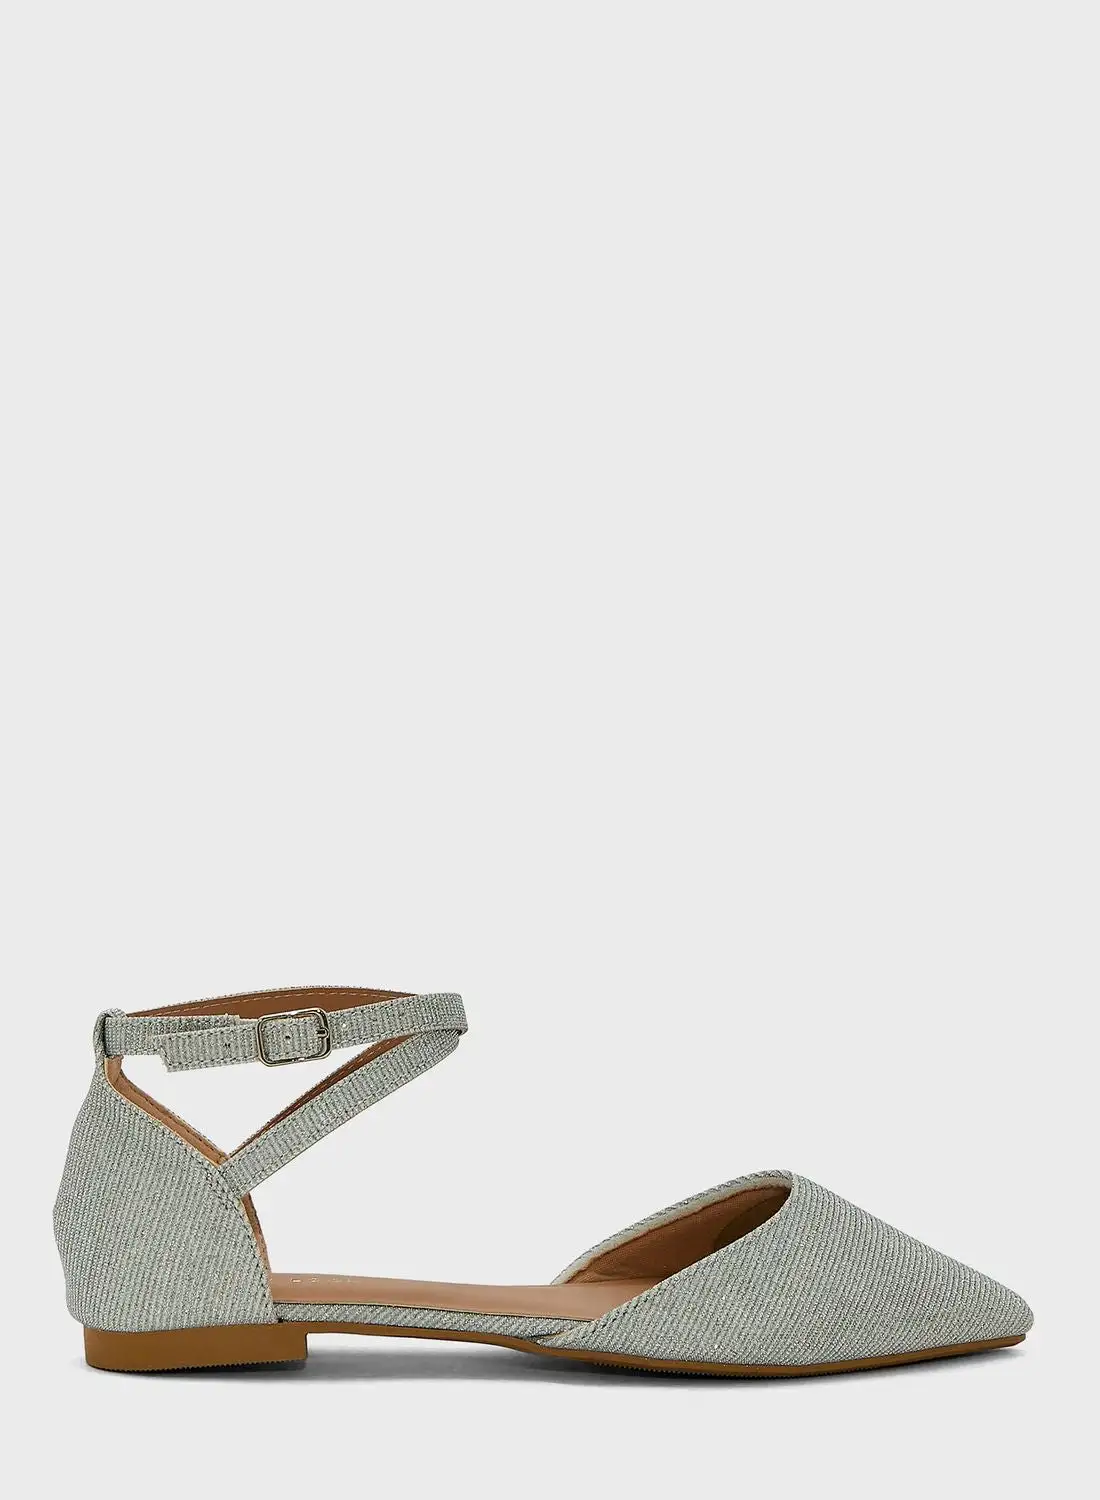 NEW LOOK Livia Ankle Strap Pumps